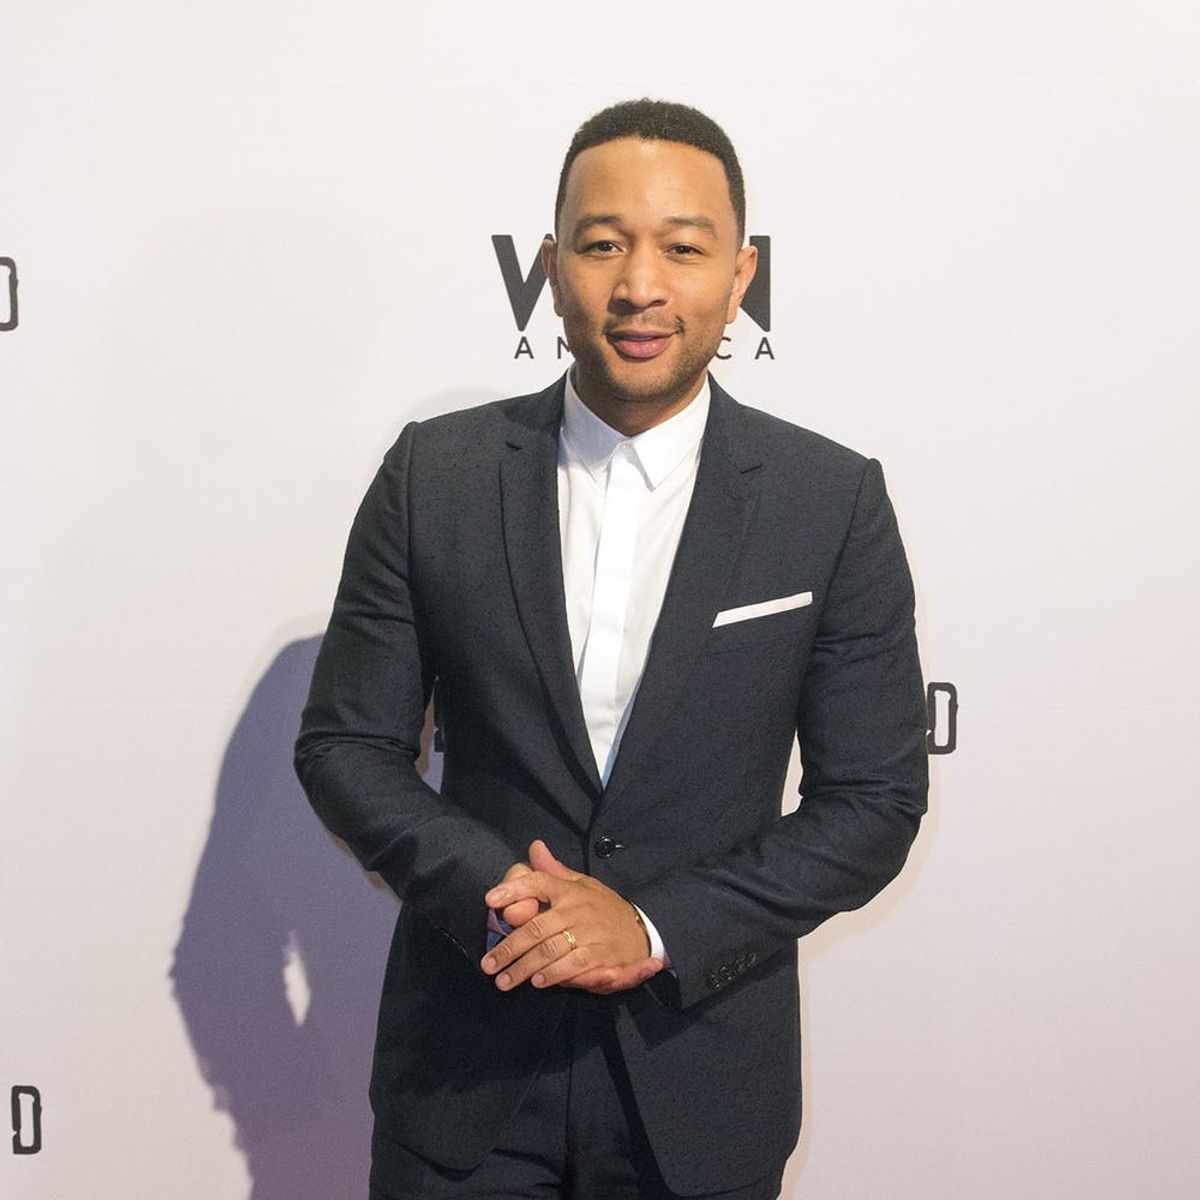 John Legend’s Twitter Was Hacked in a Tirade Against President Trump